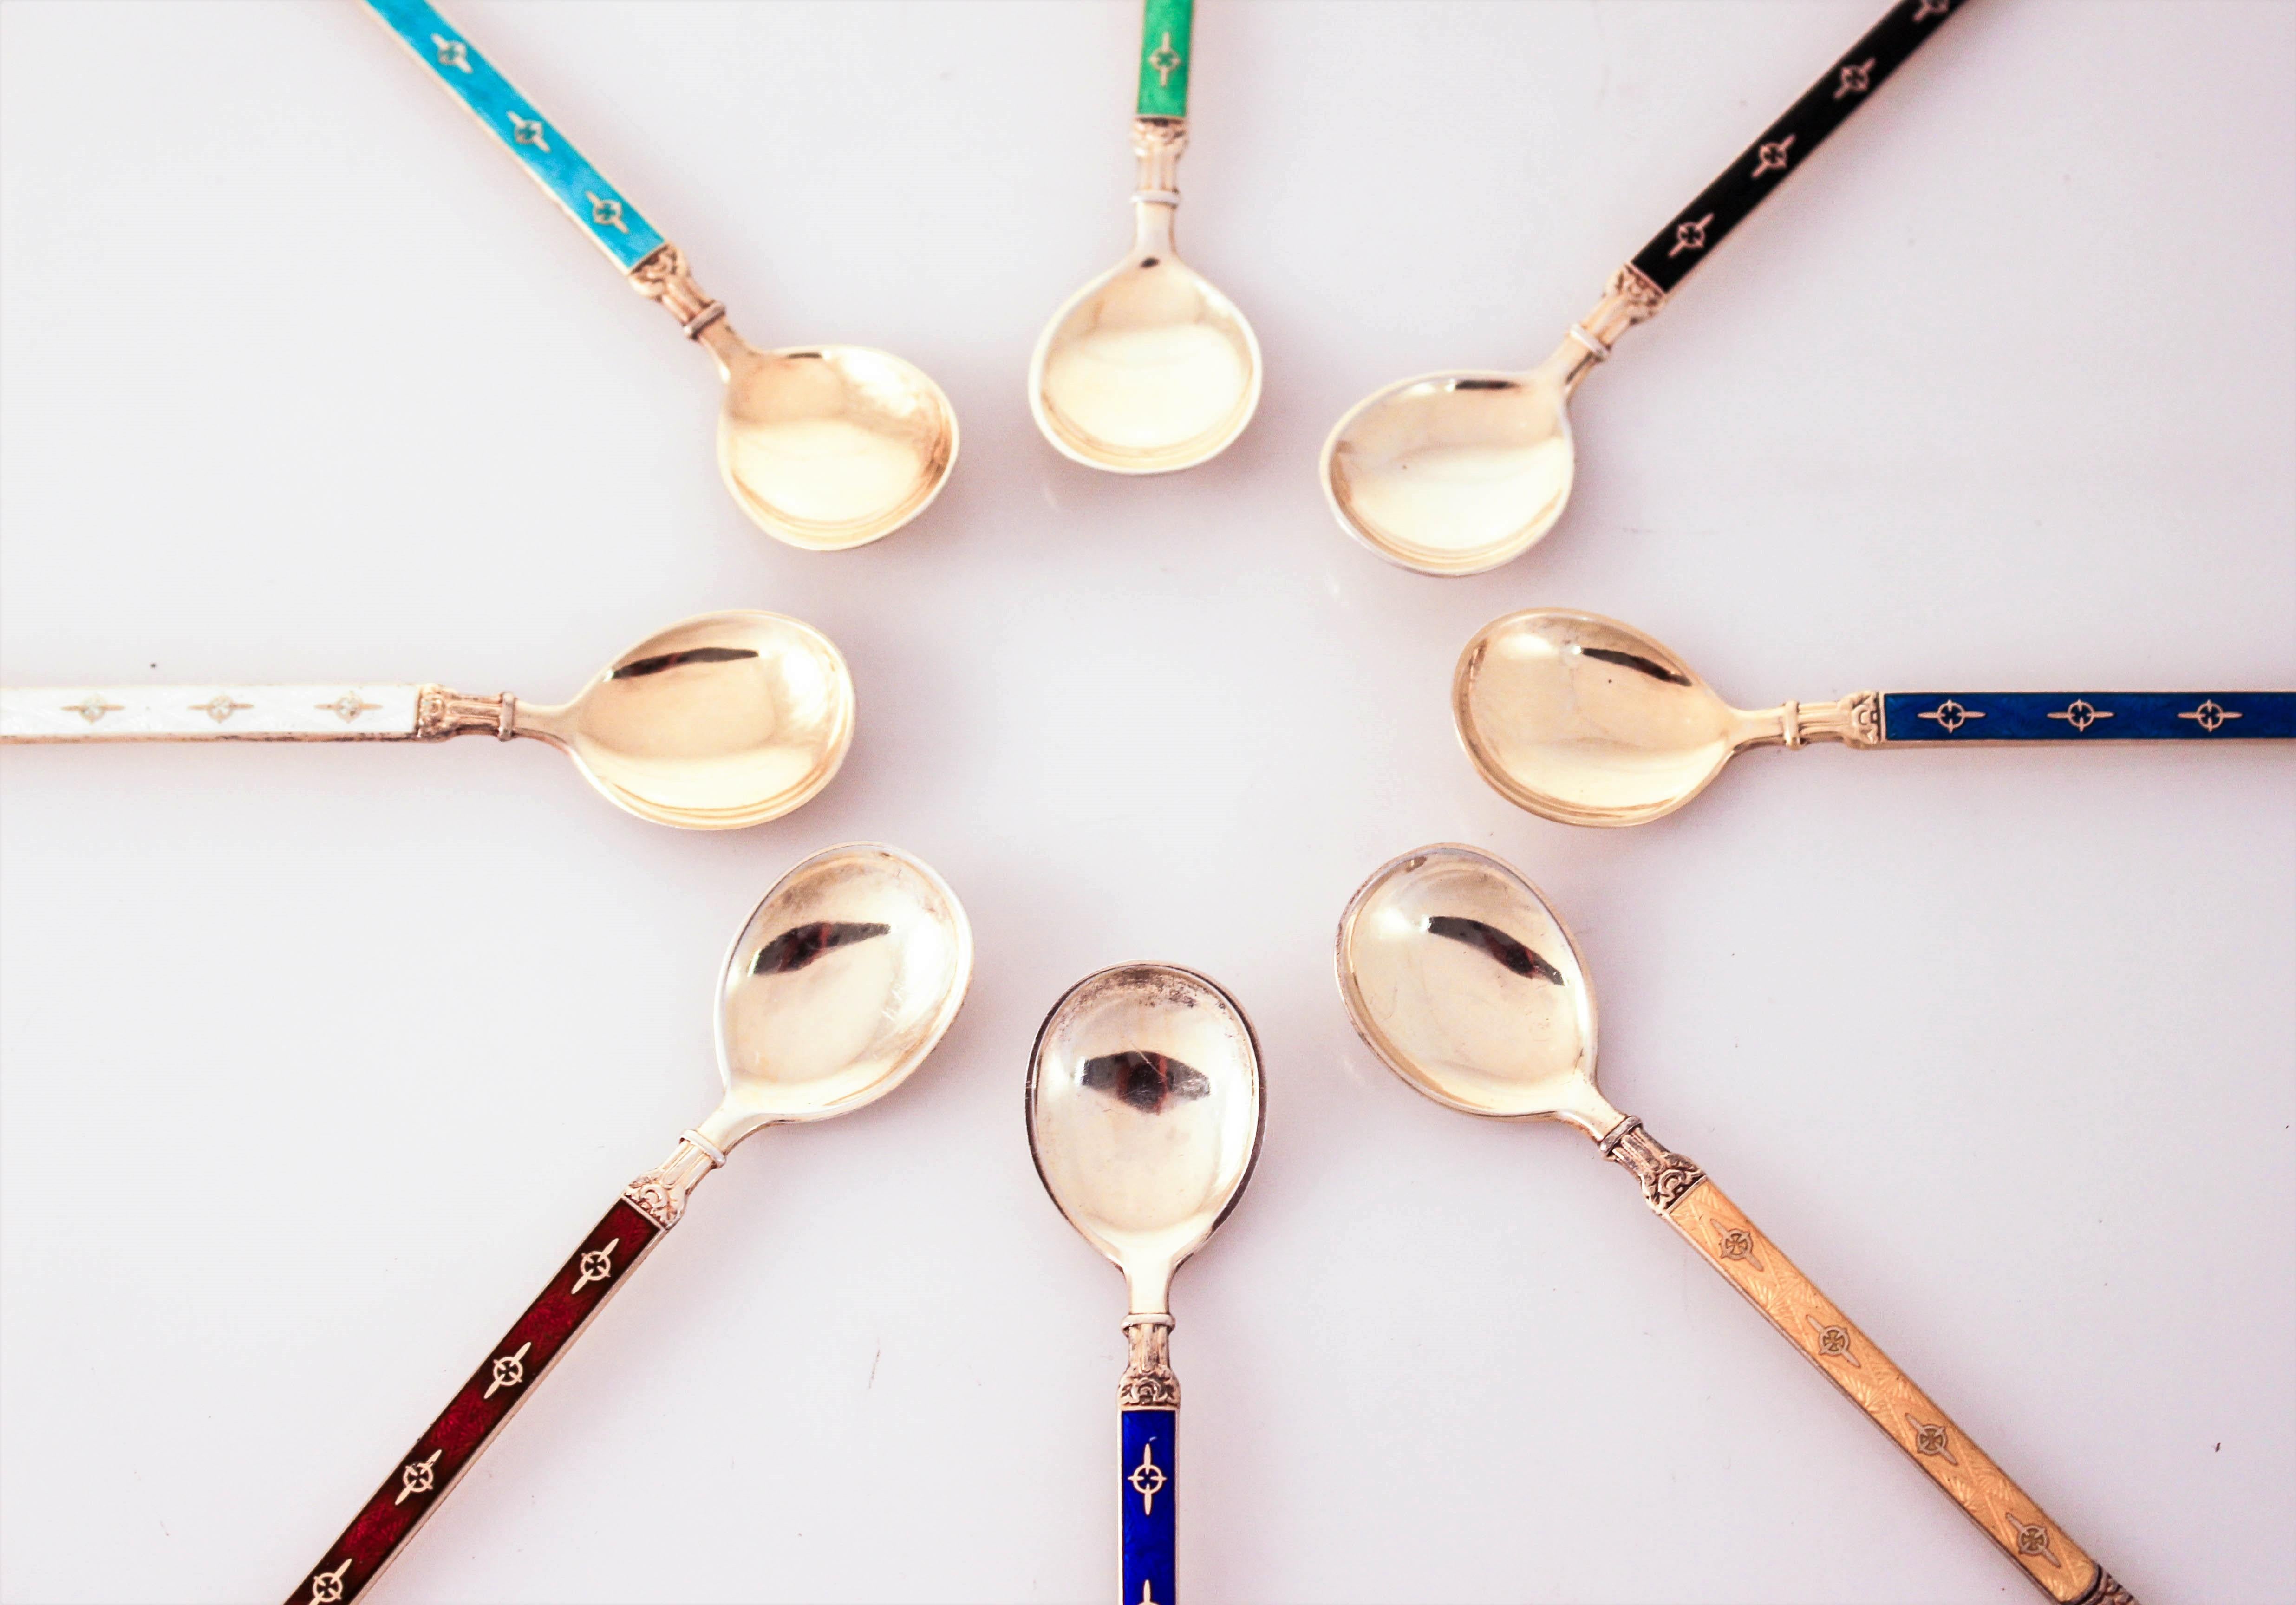 Proudly offering a set of eight sterling silver demitasse spoons. Rich vibrant colors; blue, yellow, white, green, purple, turquoise , black and maroon on gold washed sterling silver. Enamel on sterling was very popular in the Art Deco period. Each